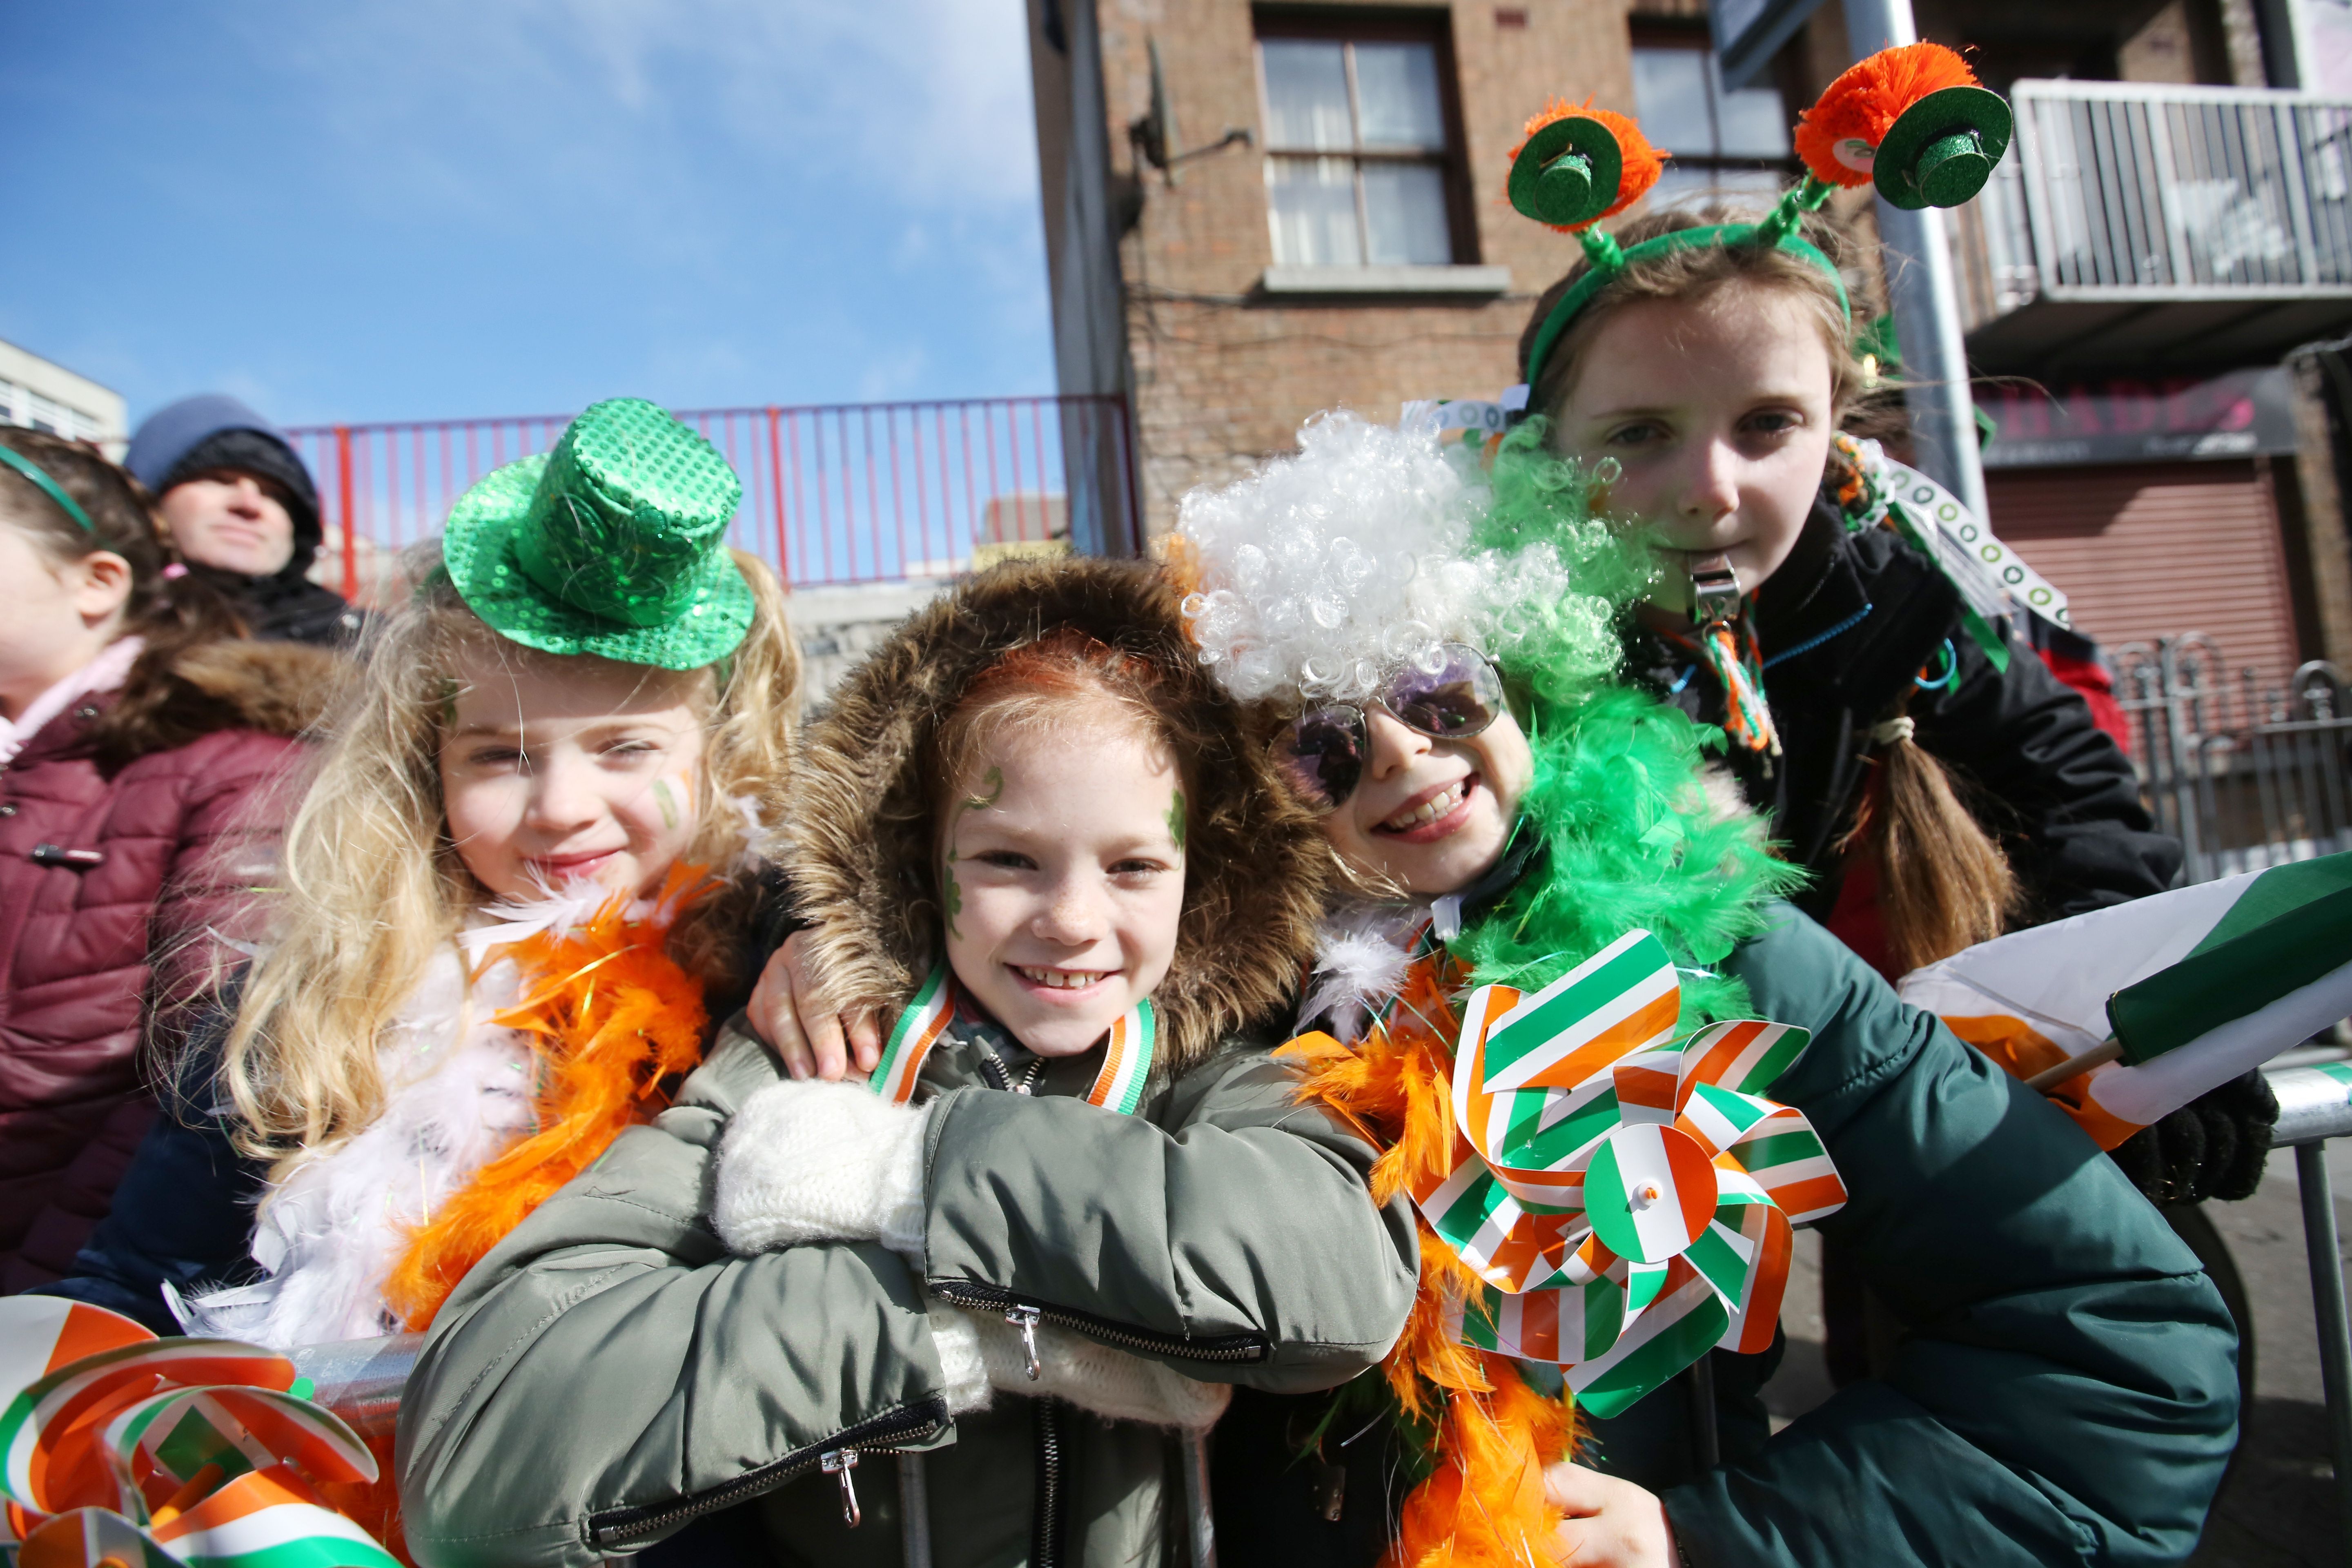 Ireland ready for double bank holiday this St. Patrick’s Day